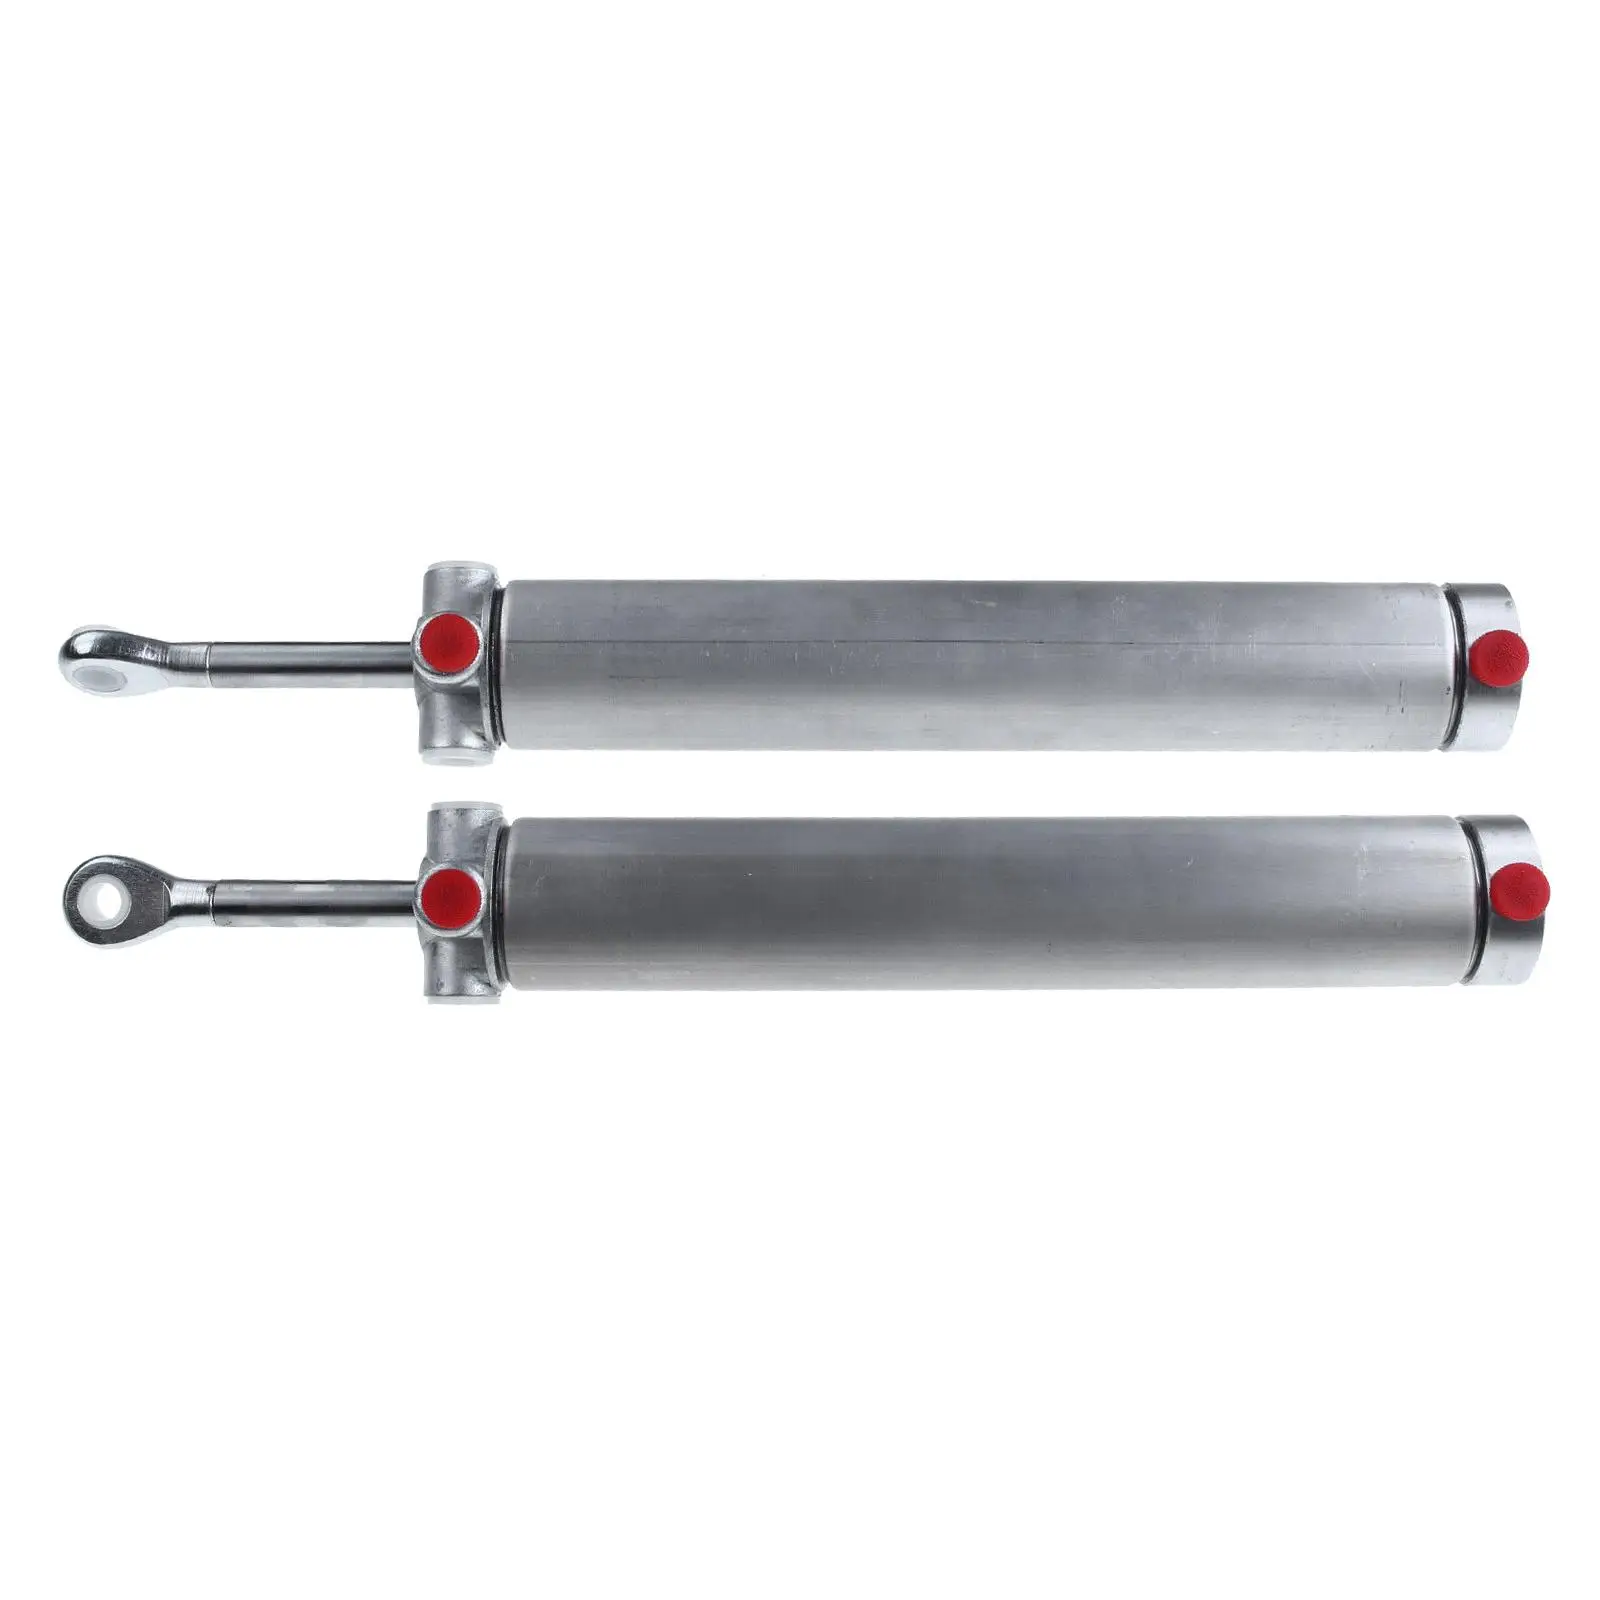 Automotive Convertible Top Hydraulic Cylinders for Ford Mustang ,One for Driver Side and One for Passenger Side Replacement